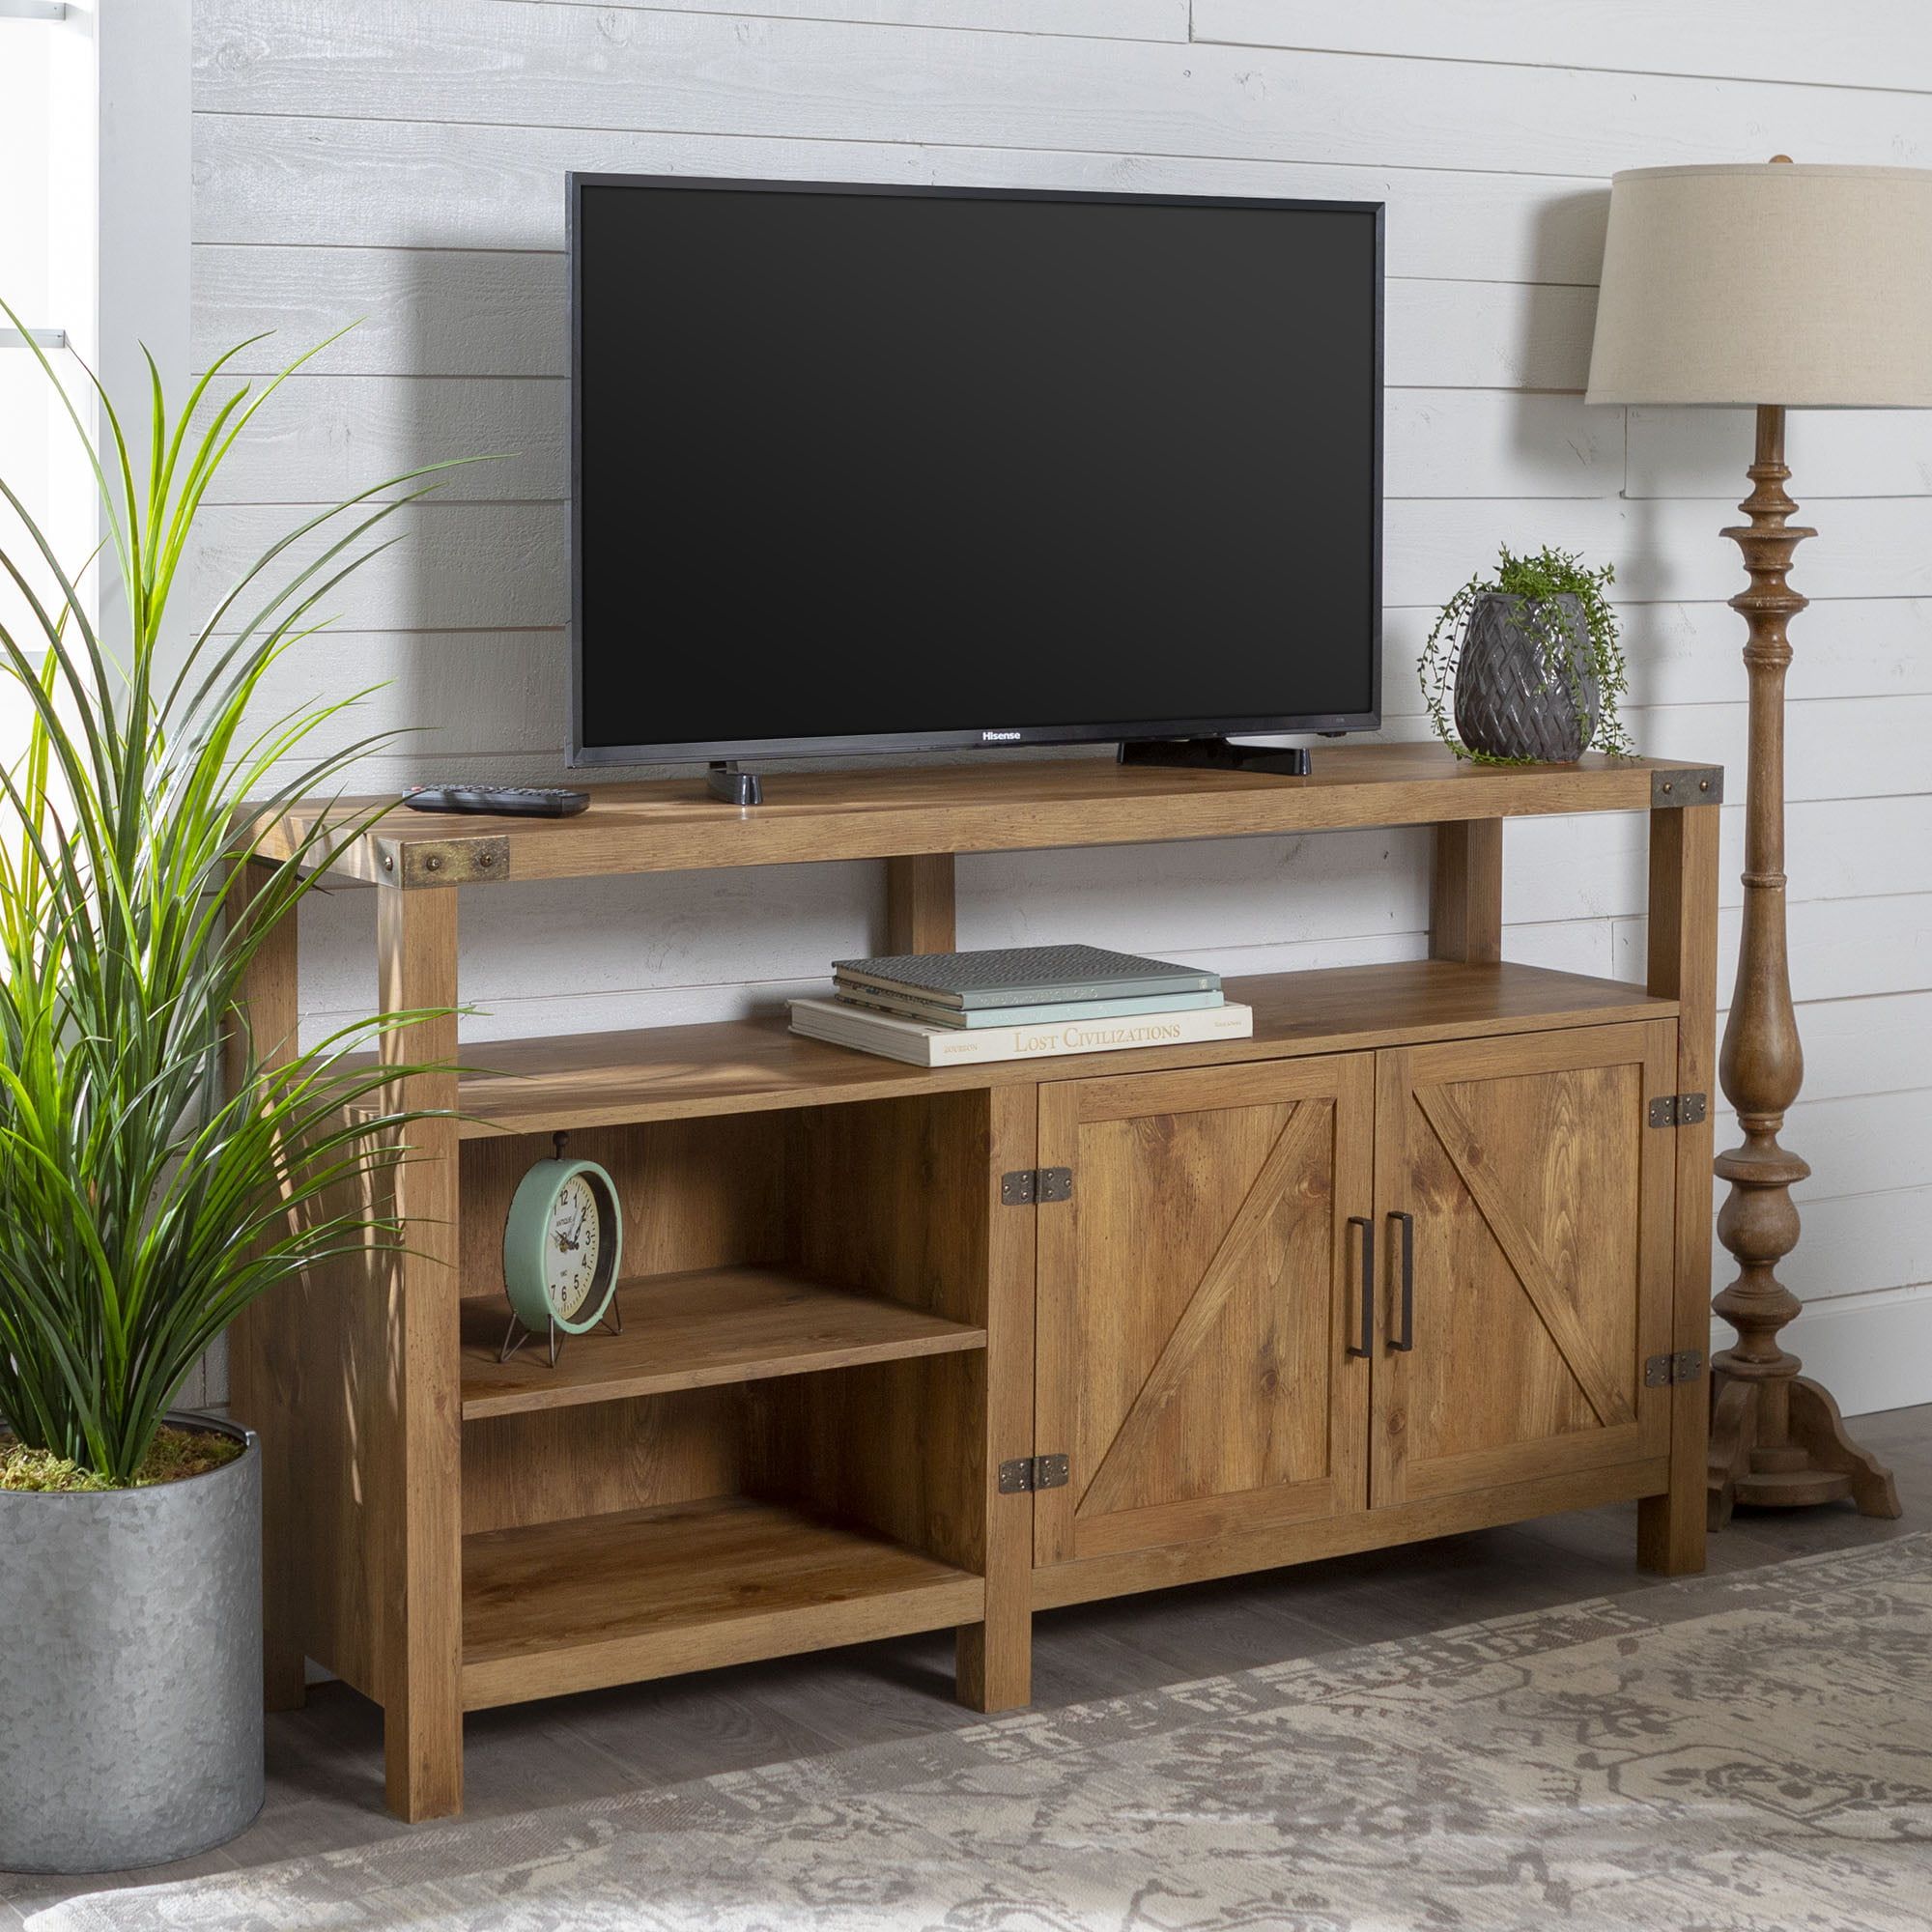 Woven Paths Modern Farmhouse Highboy Tv Stand For Tvs Up To 65 Intended For Farmhouse Tv Stands (View 9 of 20)